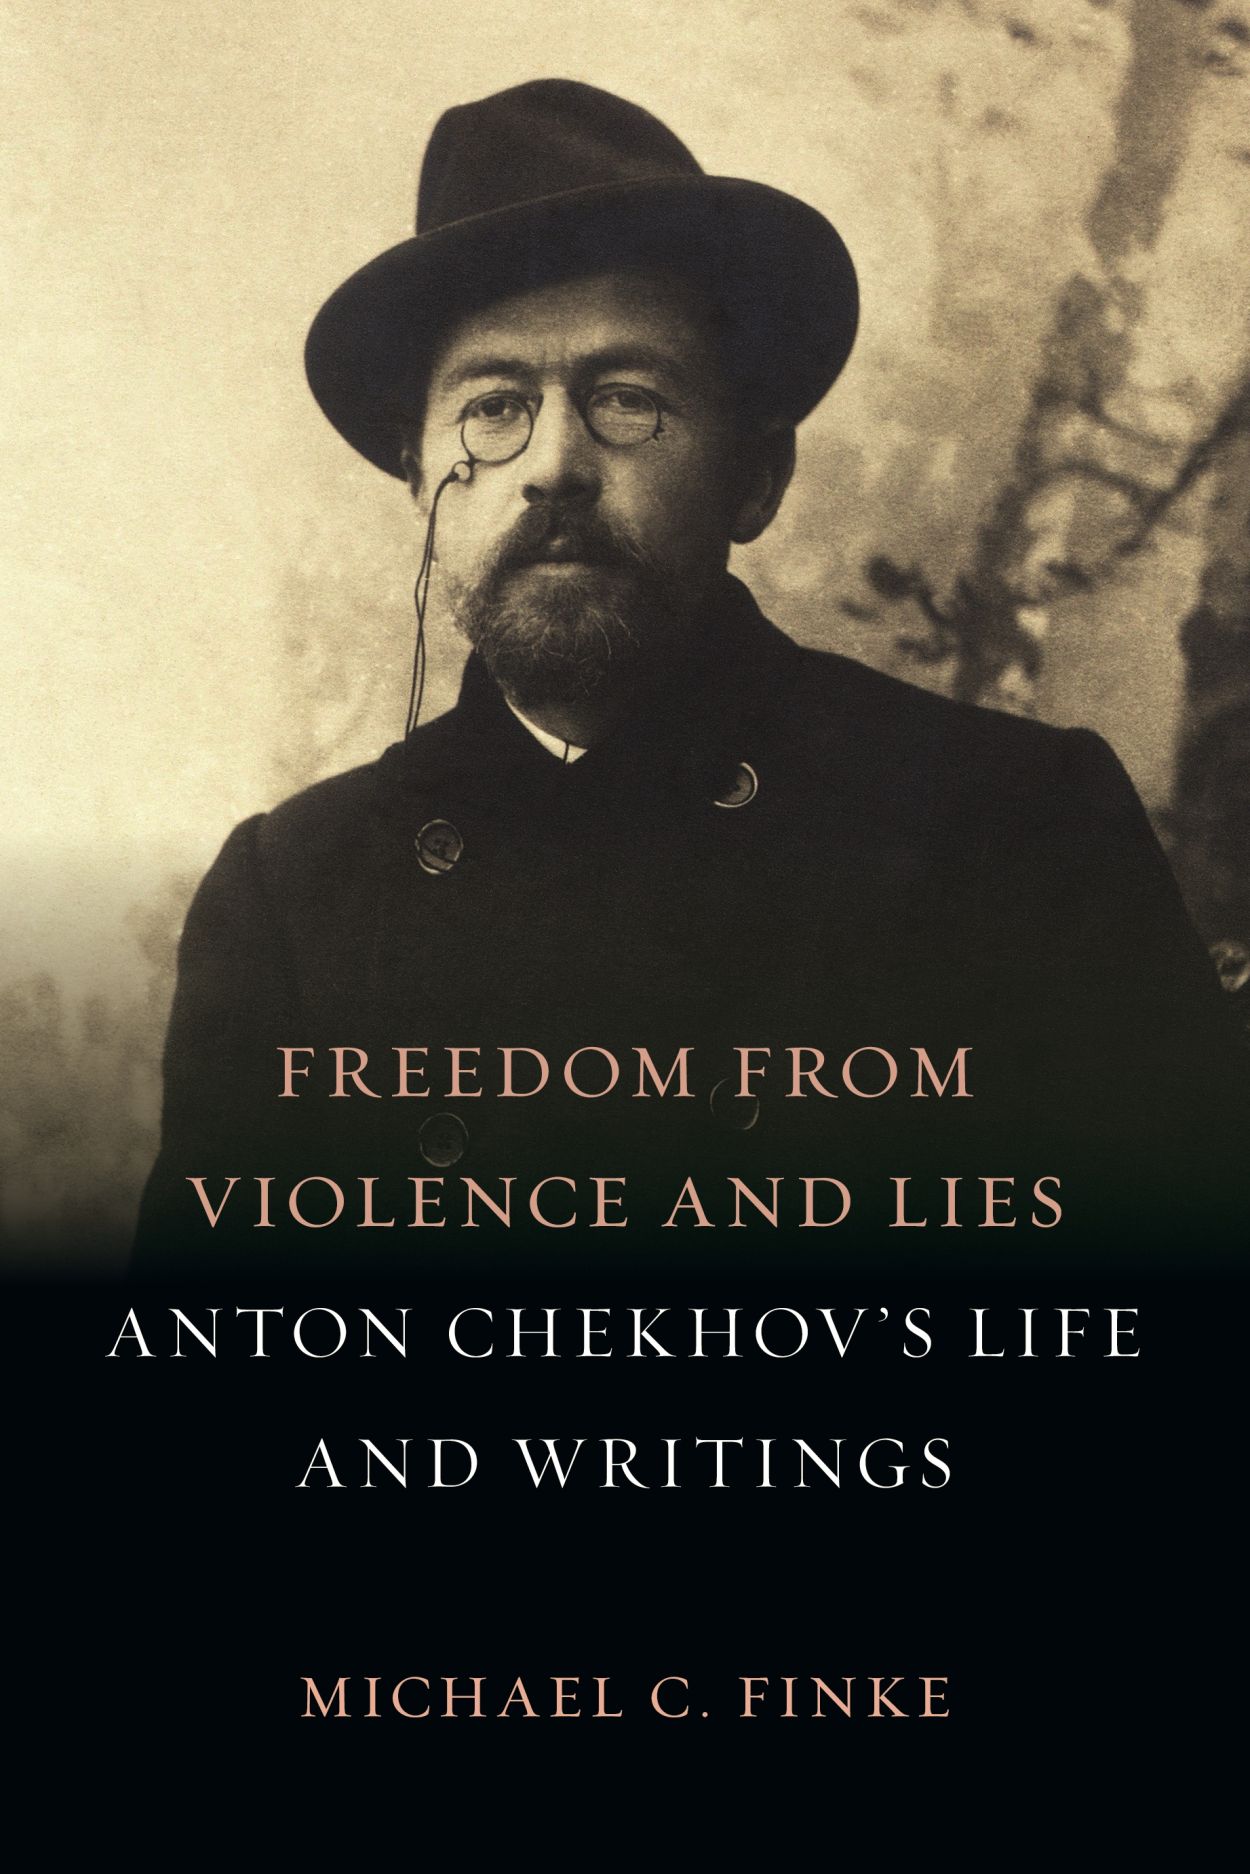 Book cover of, "Freedom from Violence and Lies: Anton Chekhov’s Life and Writings"